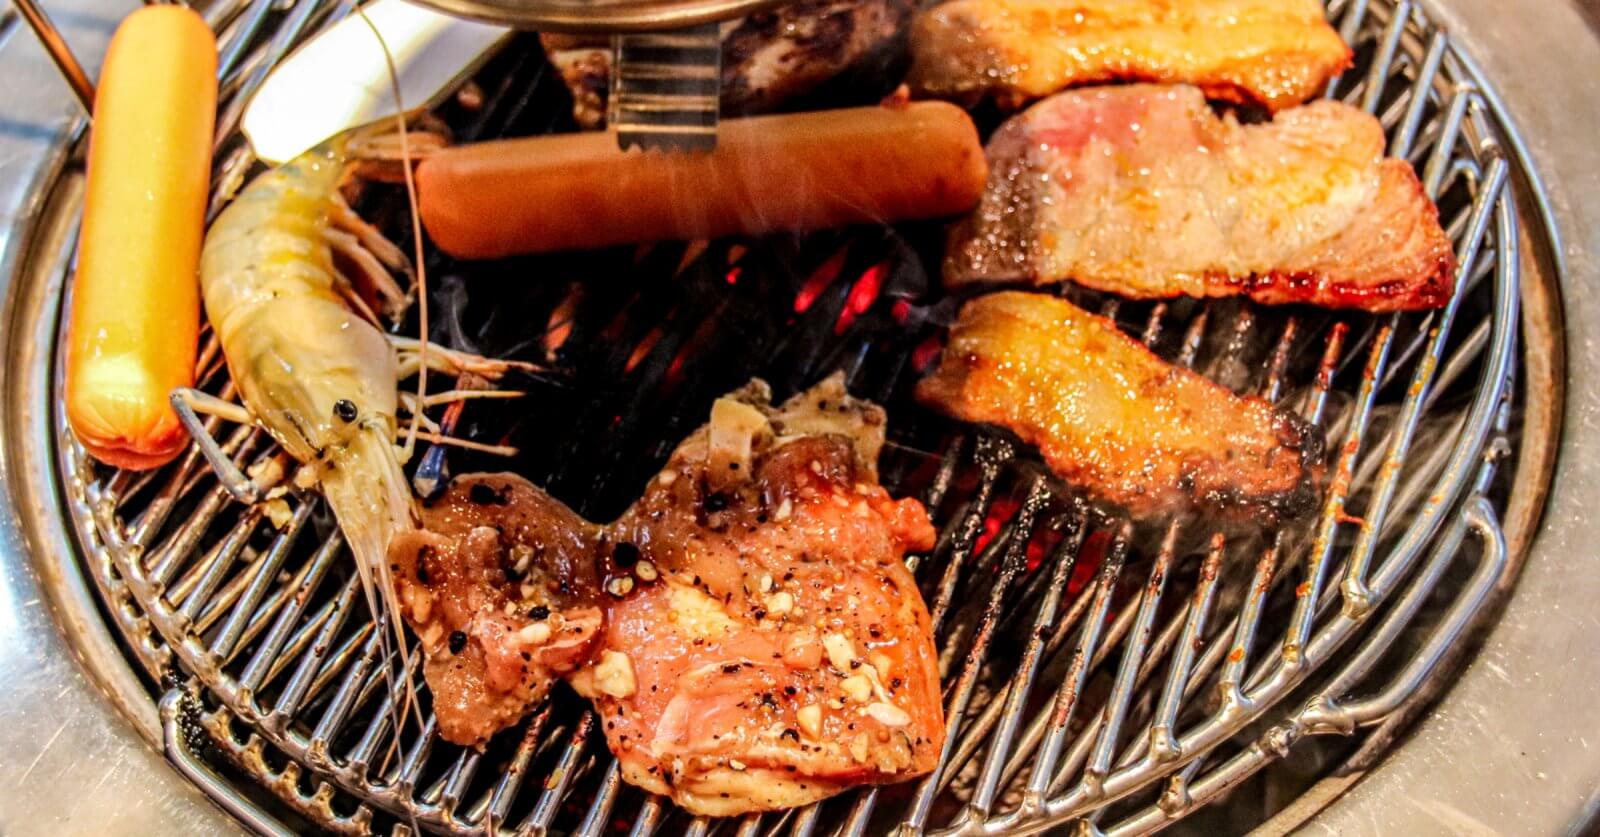 A grill loaded with various foods, including shrimp, sausage, and assorted cuts of Samgyupsal, all with visible seasoning. The grill grates have a shiny, metallic look as the food items cook to perfection, displaying grill marks and a slight char—a mouthwatering feast that could easily be found in Metro Manila.